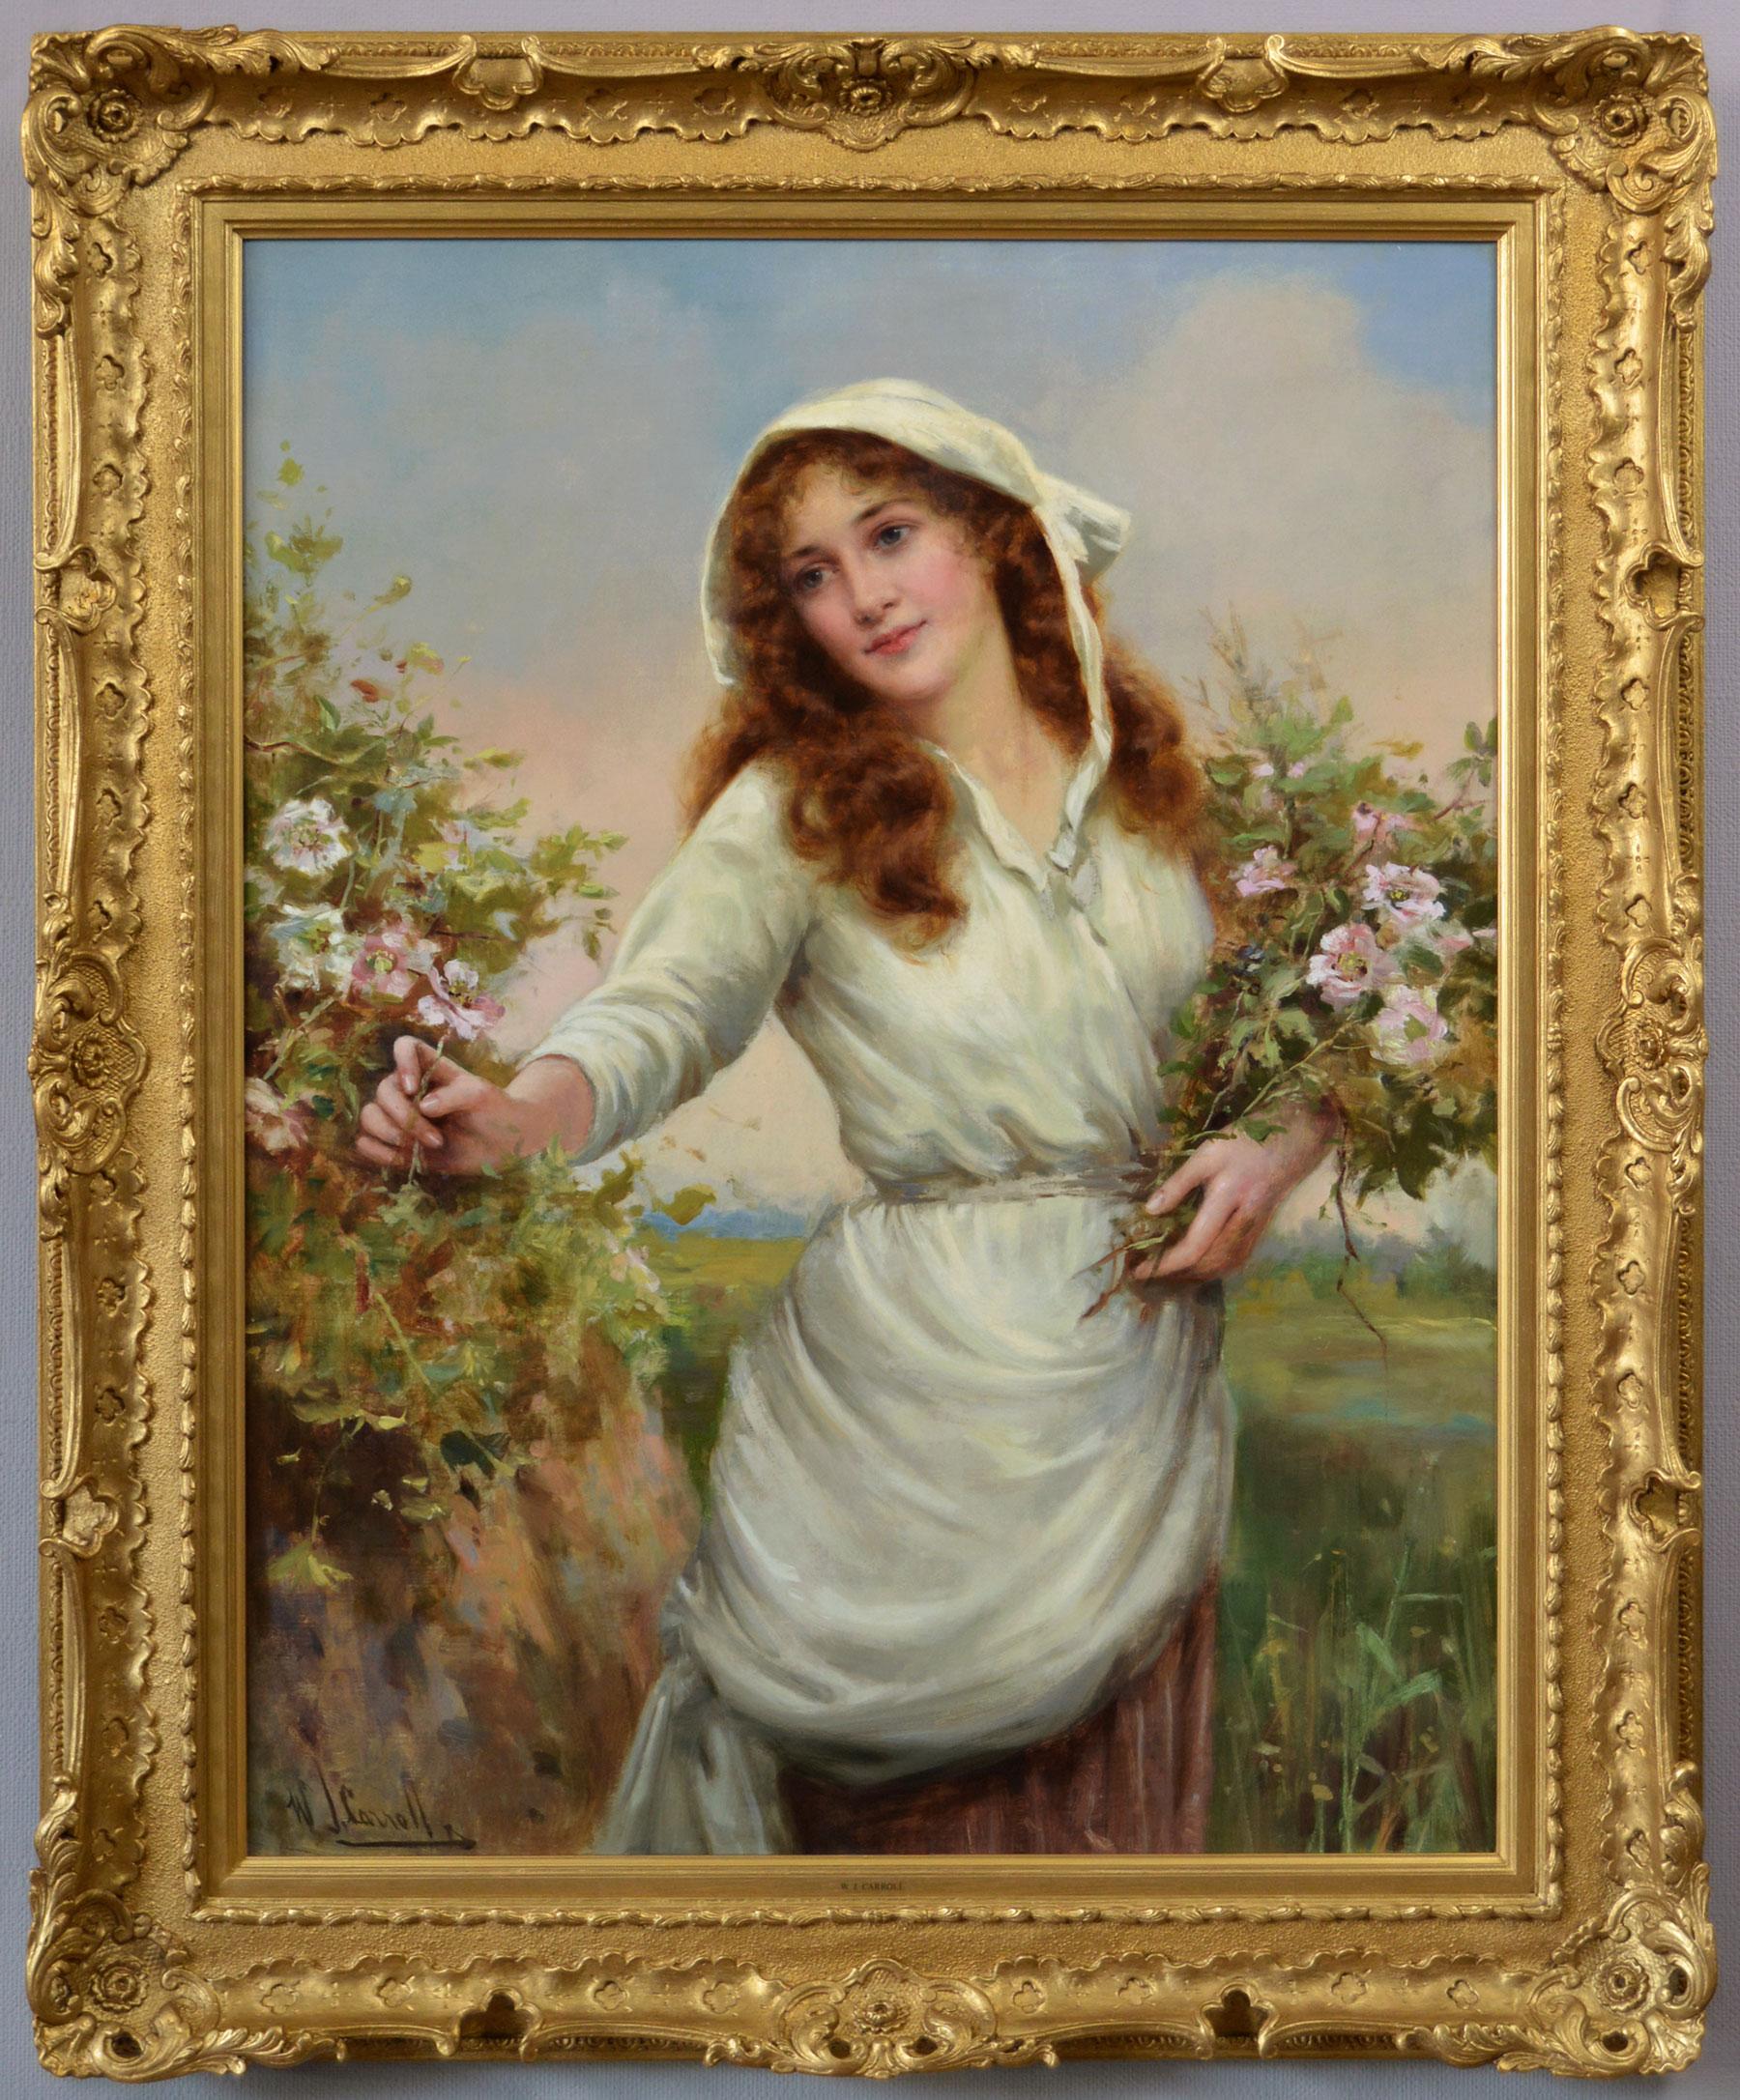 William Joseph Carroll Portrait Painting - 19th Century genre oil painting of a young woman picking flowers 